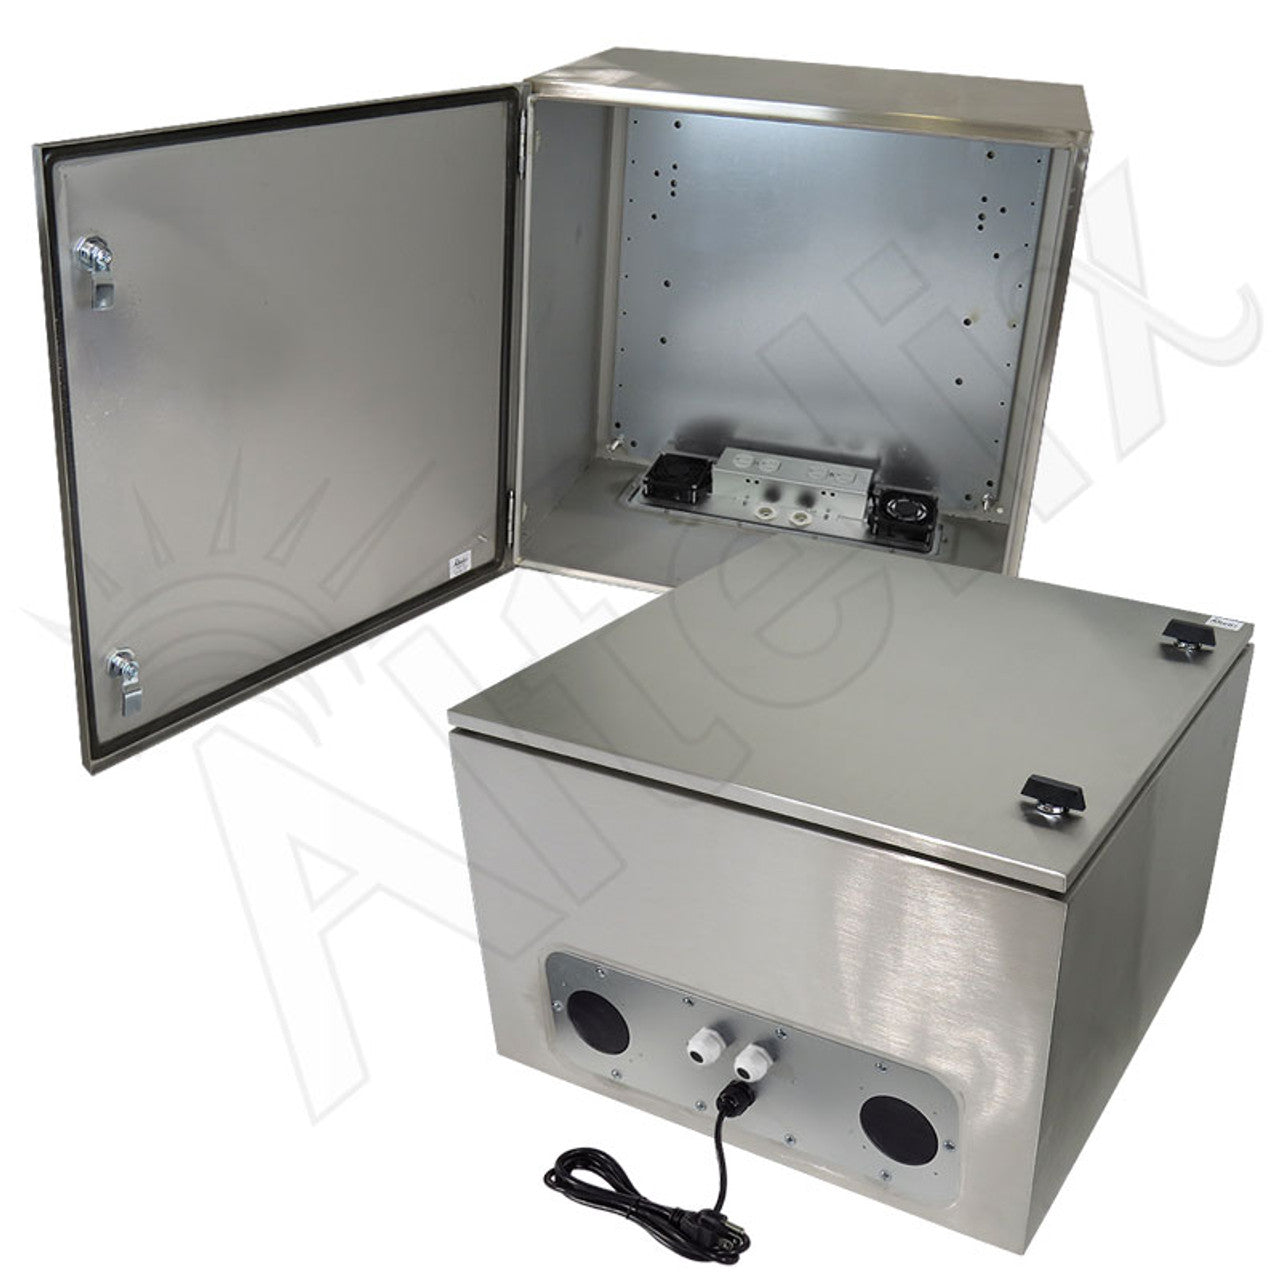 Altelix Vented Stainless Steel Weatherproof NEMA Enclosure with 120 VAC Outlets and Power Cord